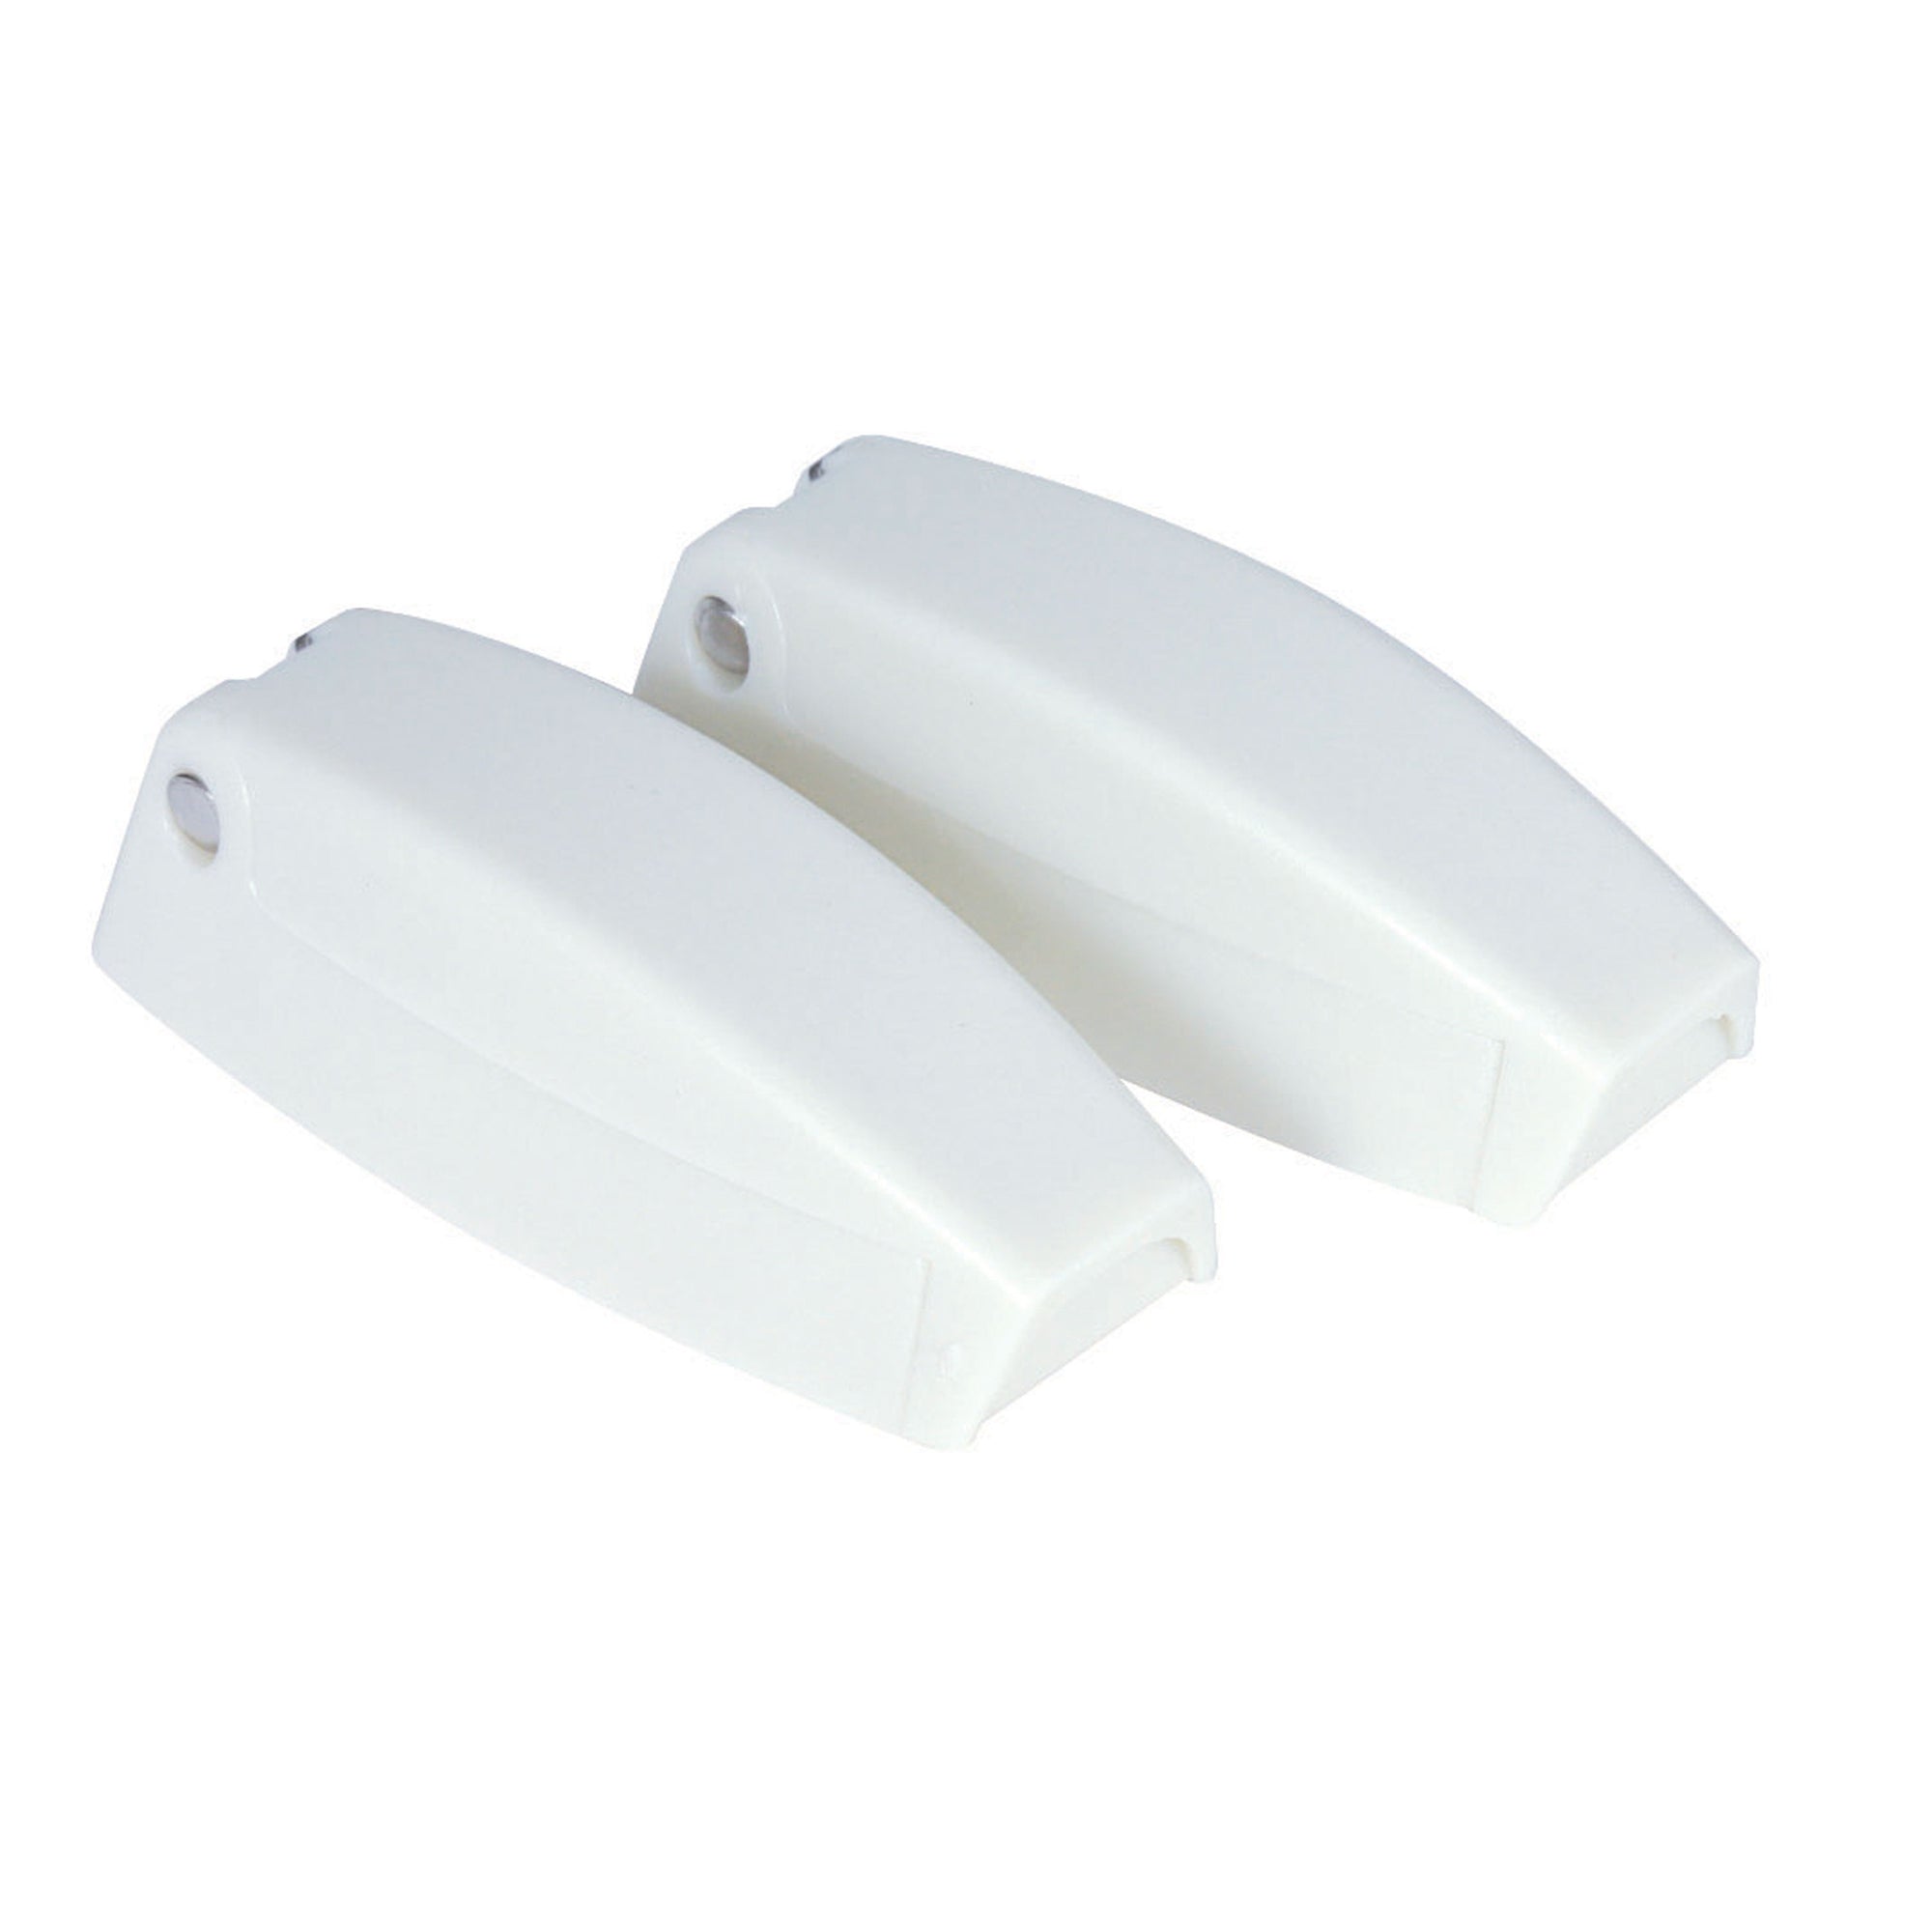 Camco 44173 Door Catch - Polar White, Pack of 2